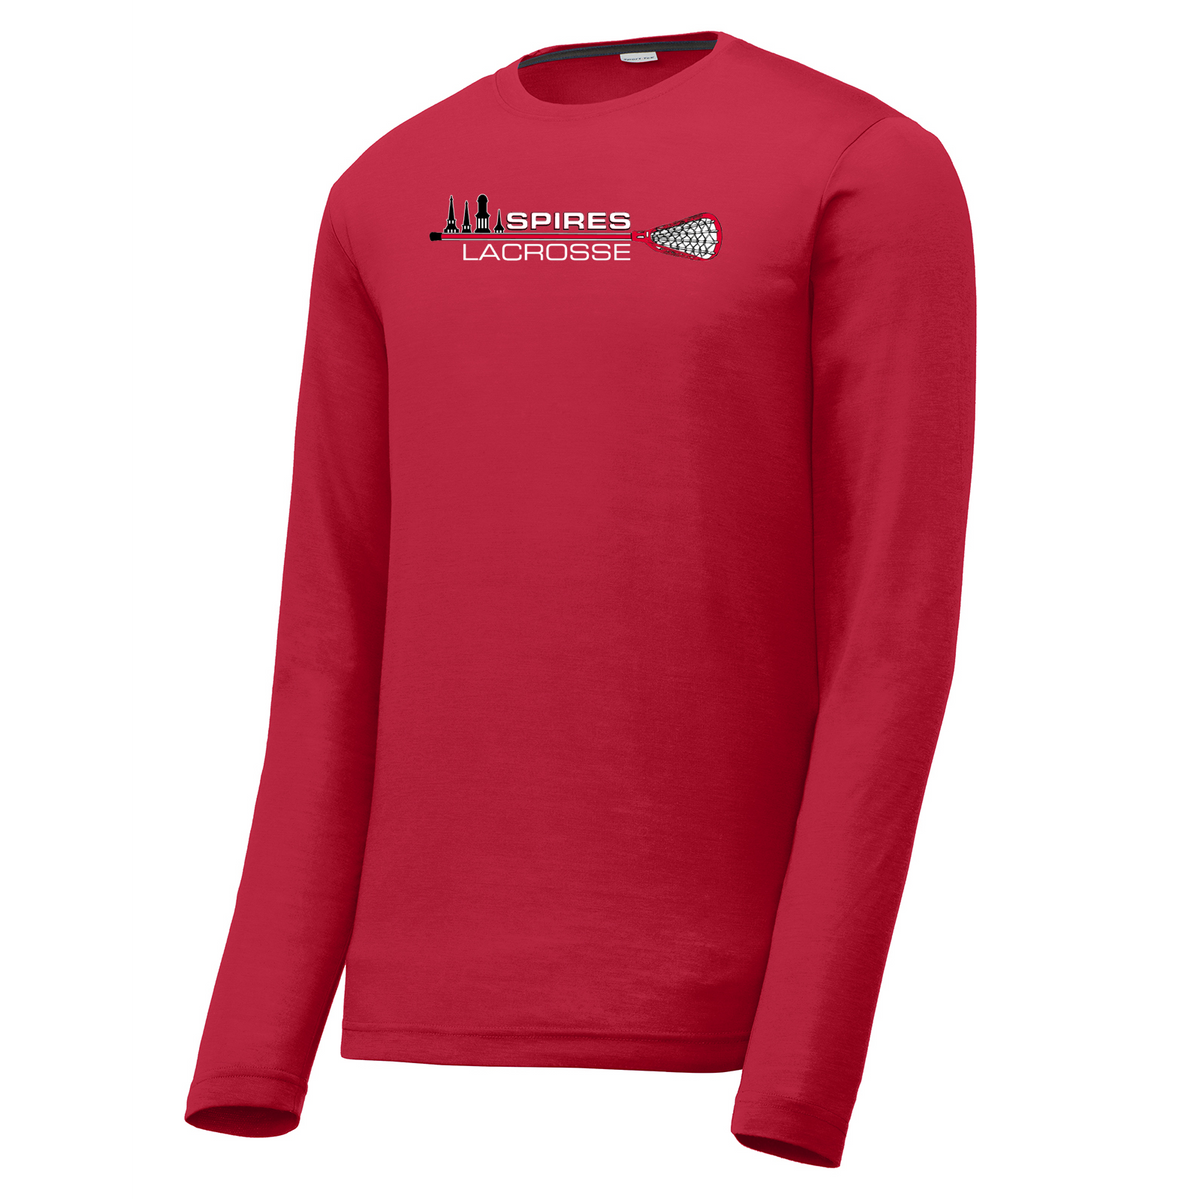 Spires Lacrosse Long Sleeve CottonTouch Performance Shirt